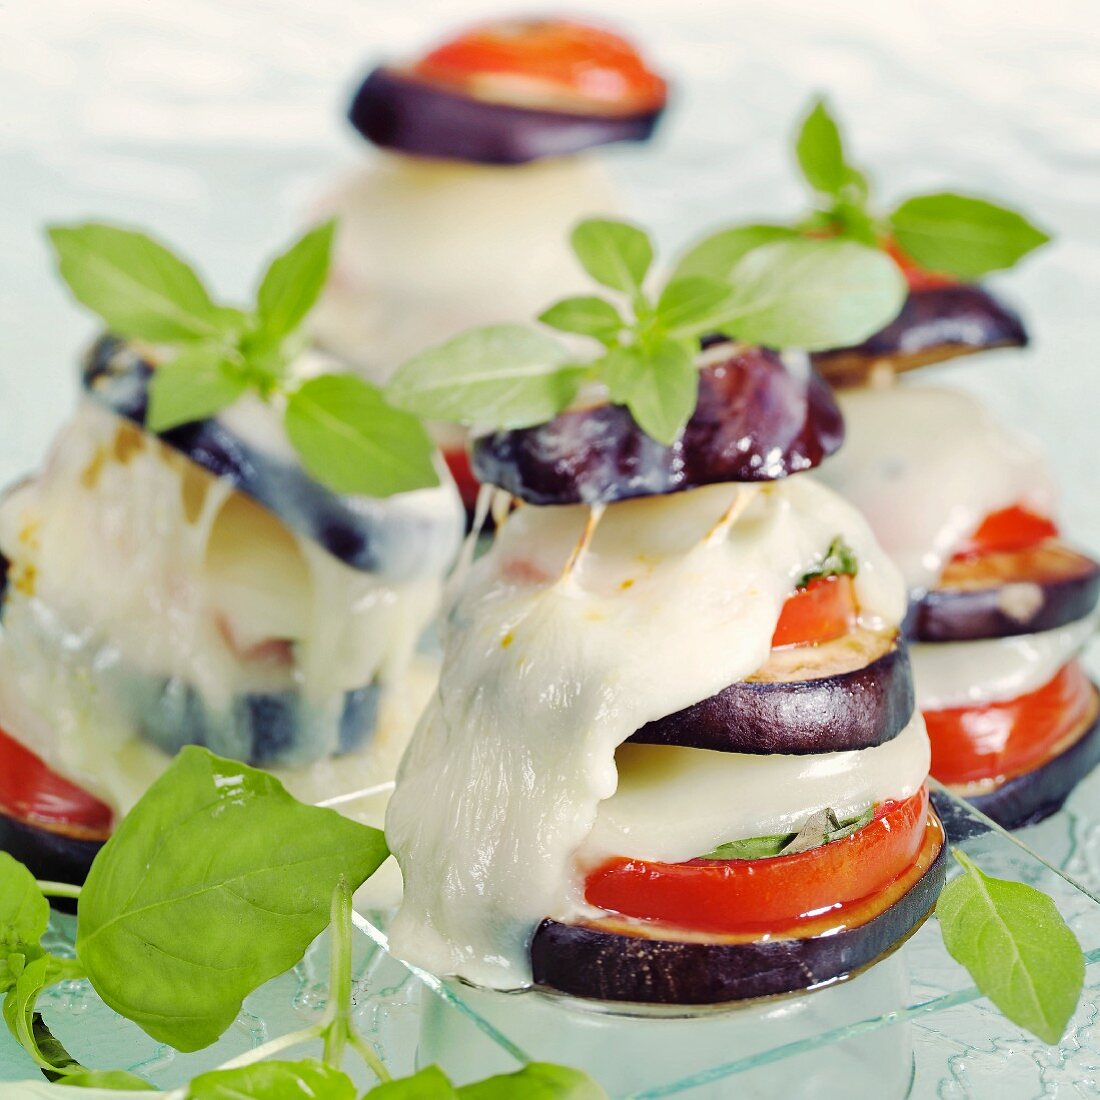 Aubergine and mozzarella tower with tomatoes and basil